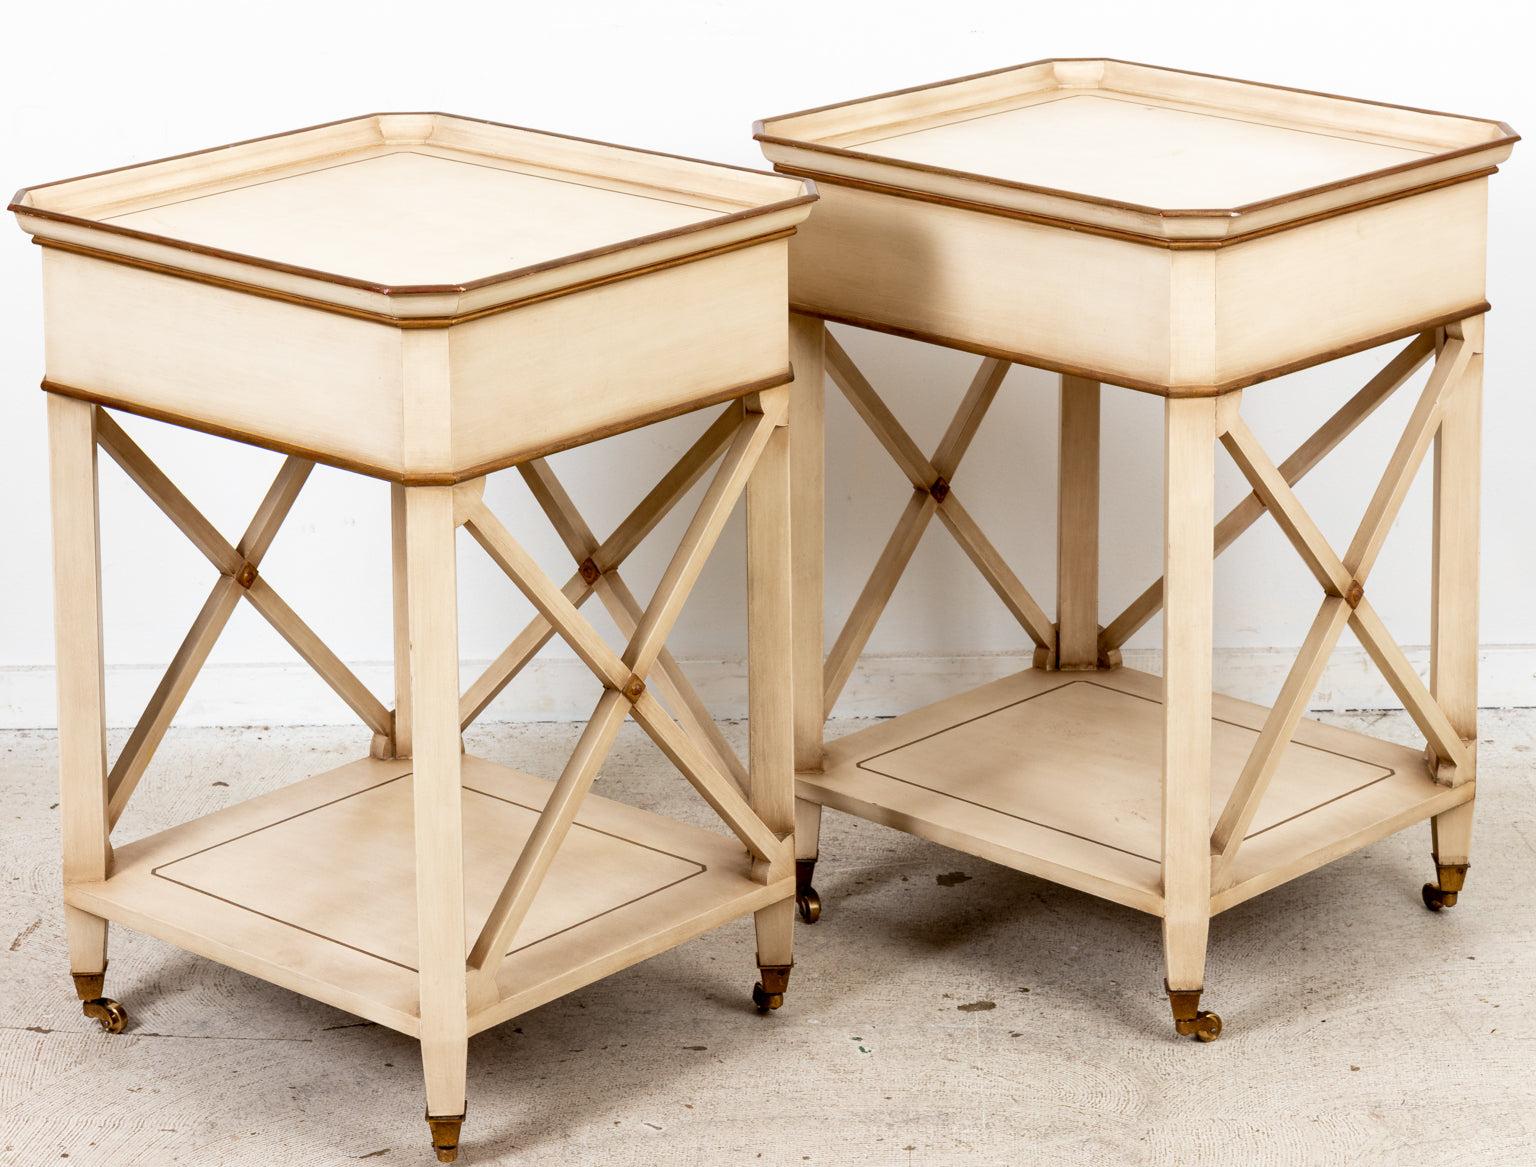 20th Century Pair of Side Tables on Casters